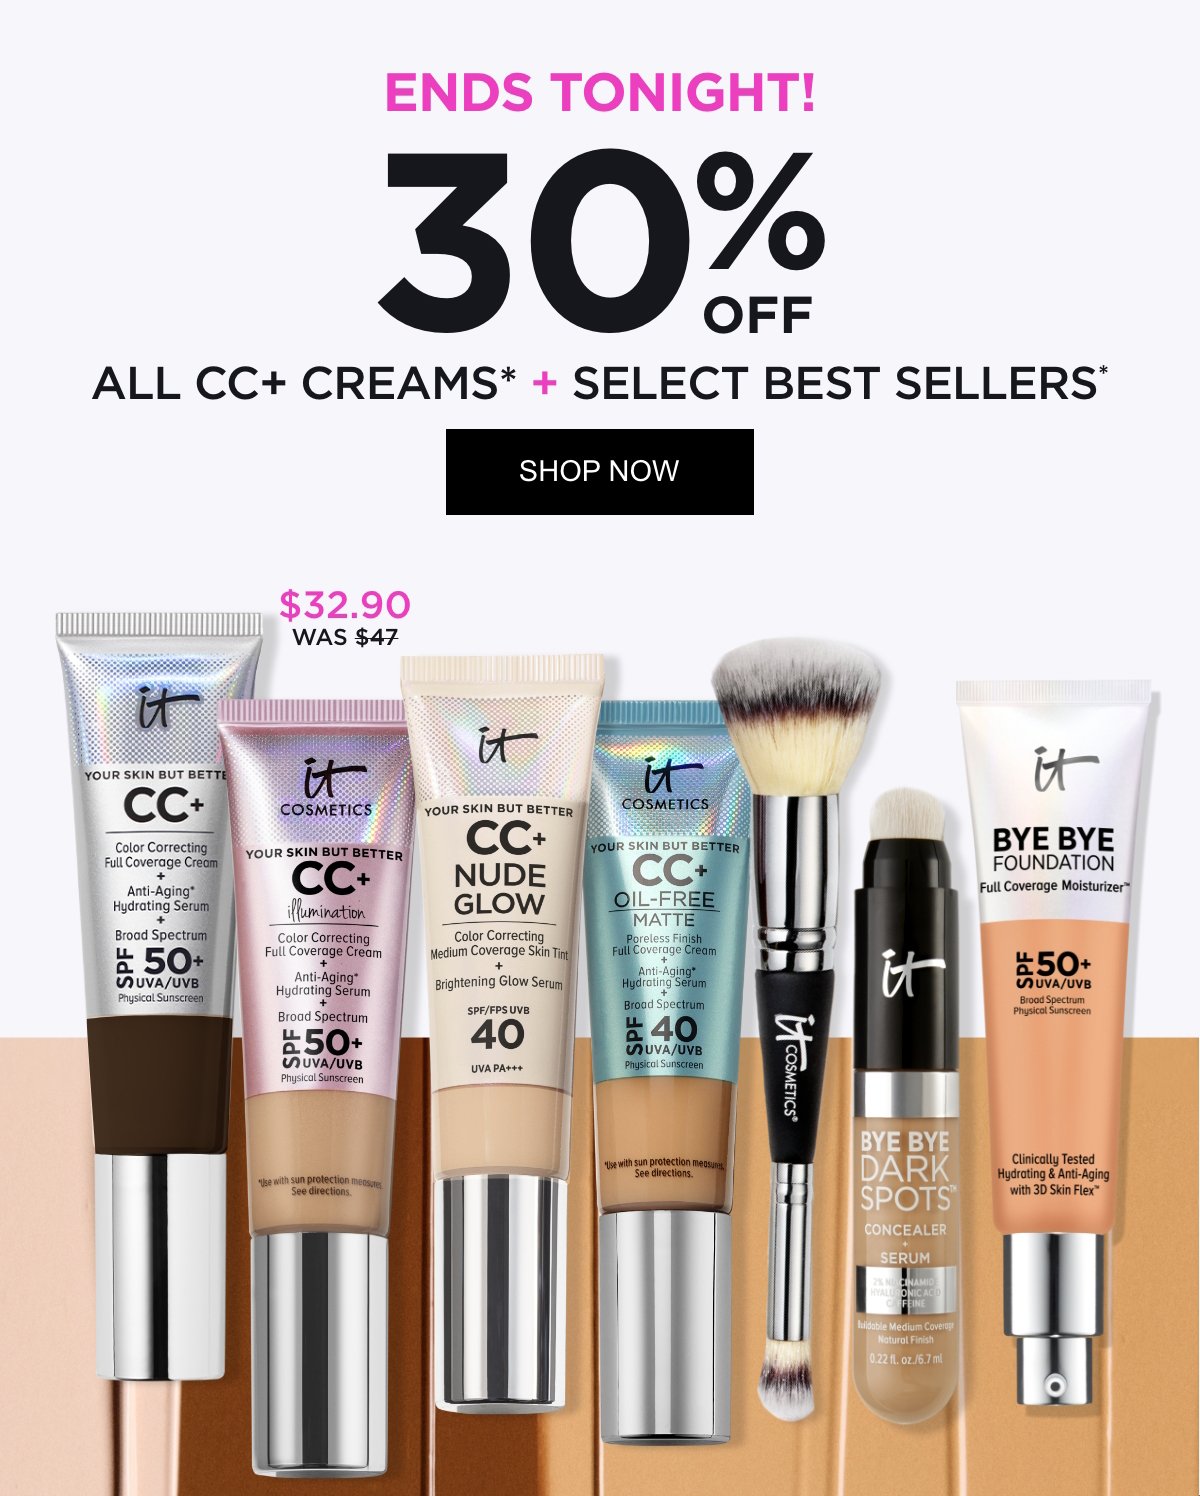 ALL CC+ CREAMS* + SELECT BEST SELLERS*